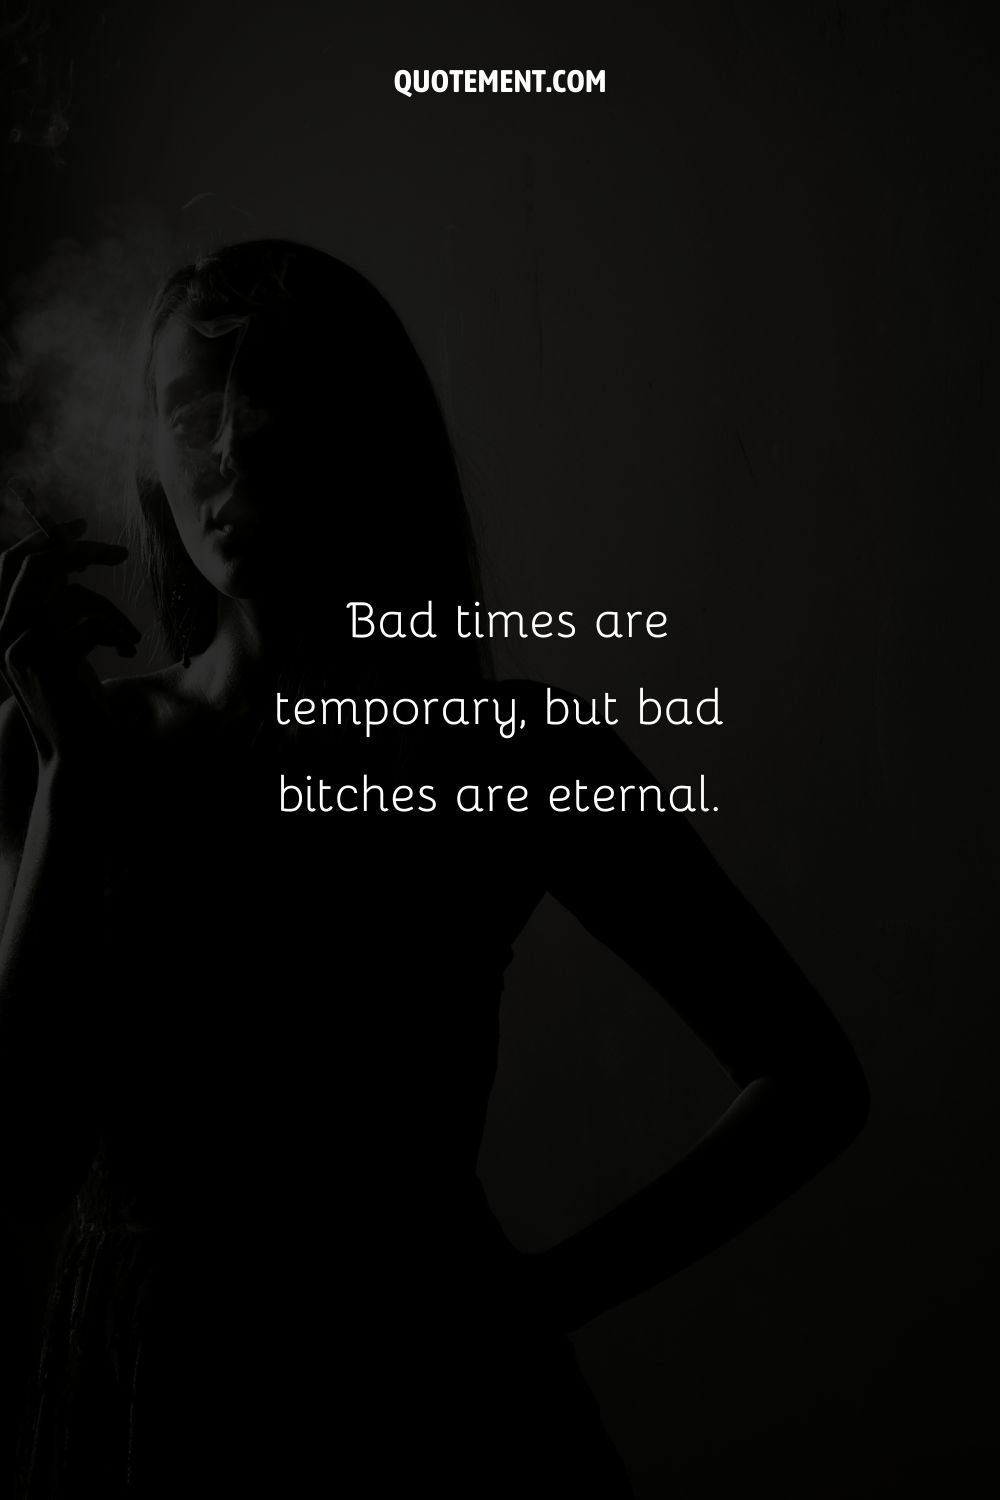 Monochrome image of a girl smoking a cigarette representing a bad bitch caption.